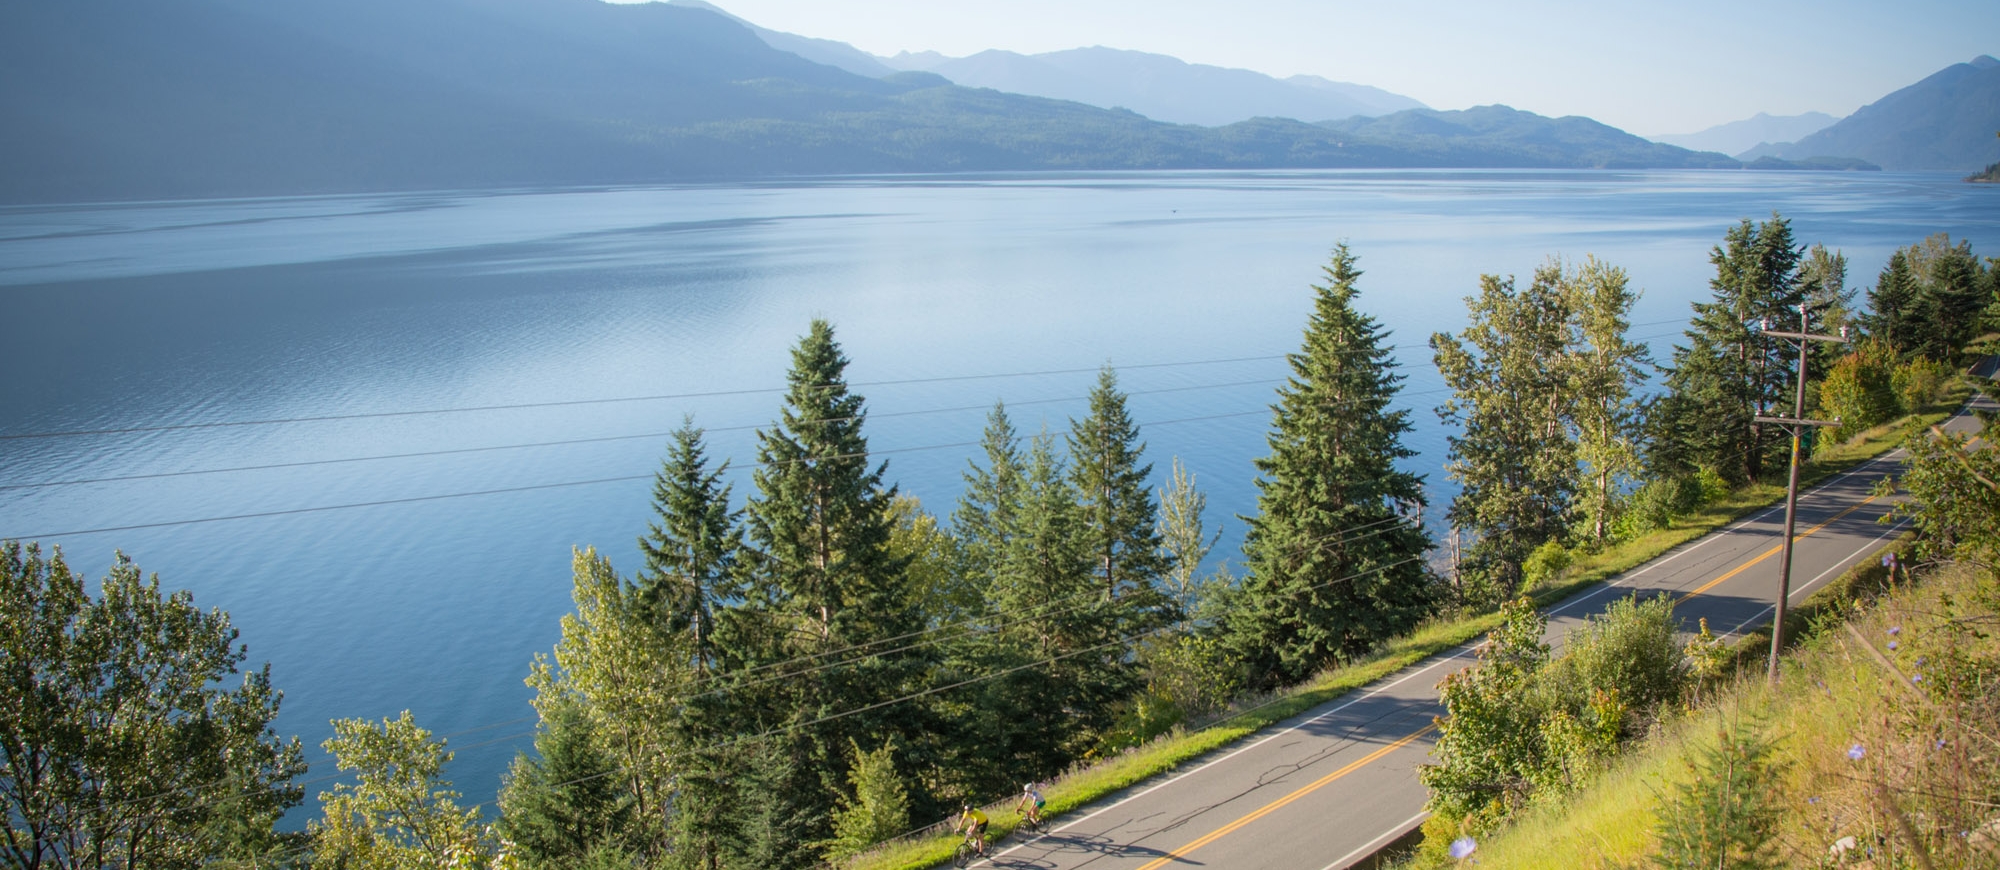 Two cyclists riding scenic routes in BC near Kaslo, BC